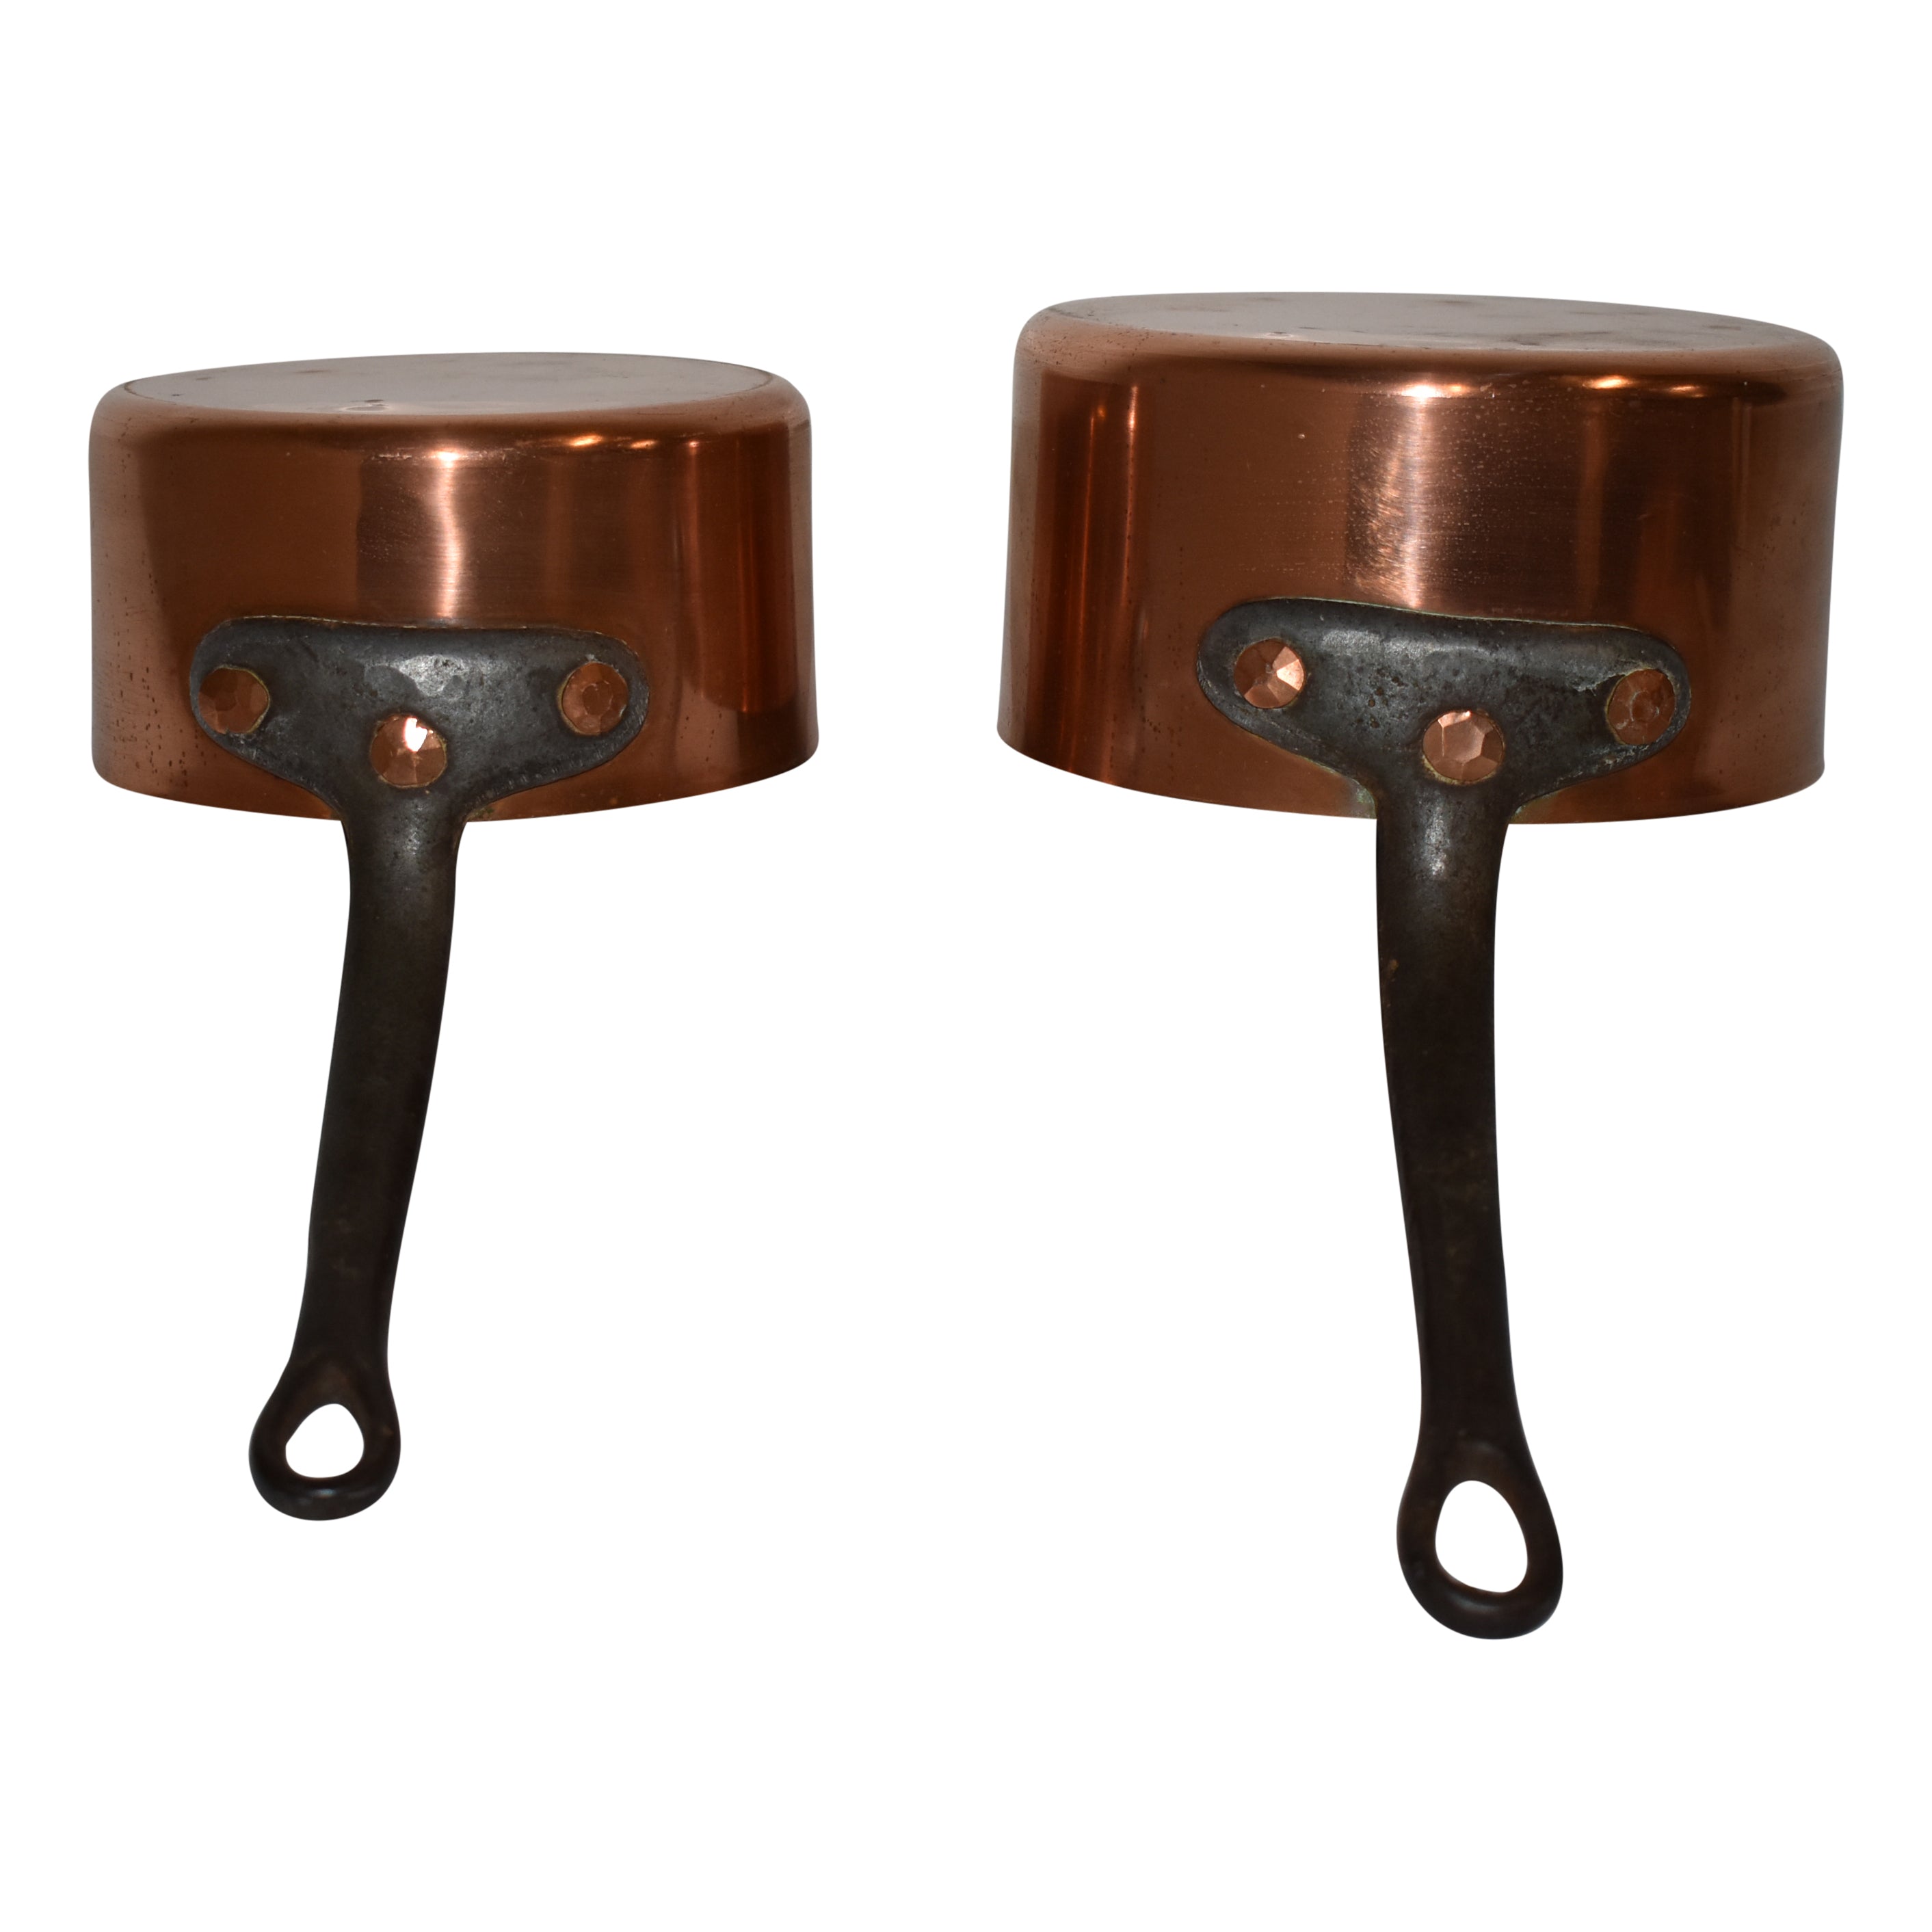 Copper Saucepans with Iron Handles